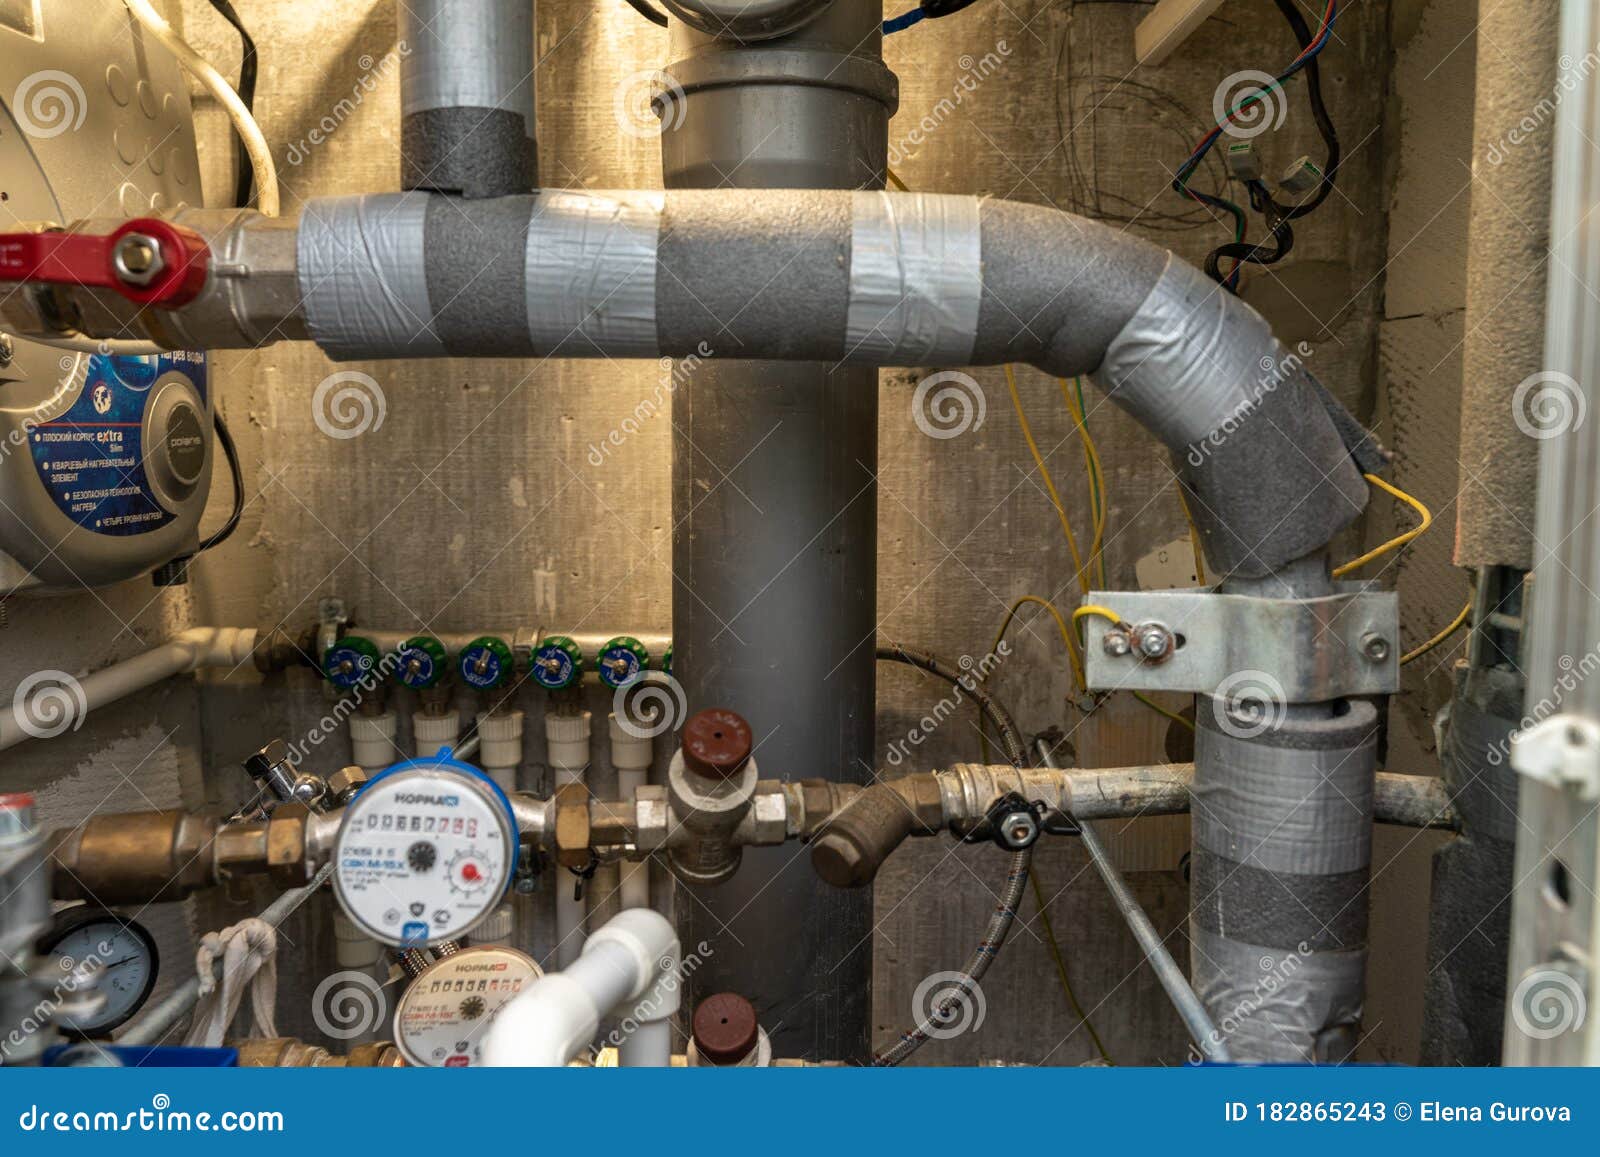 Shut Off Hot Water Plumbing Cabinet And Its Filling Editorial Stock Photo Image Of Drop Economy 182865243